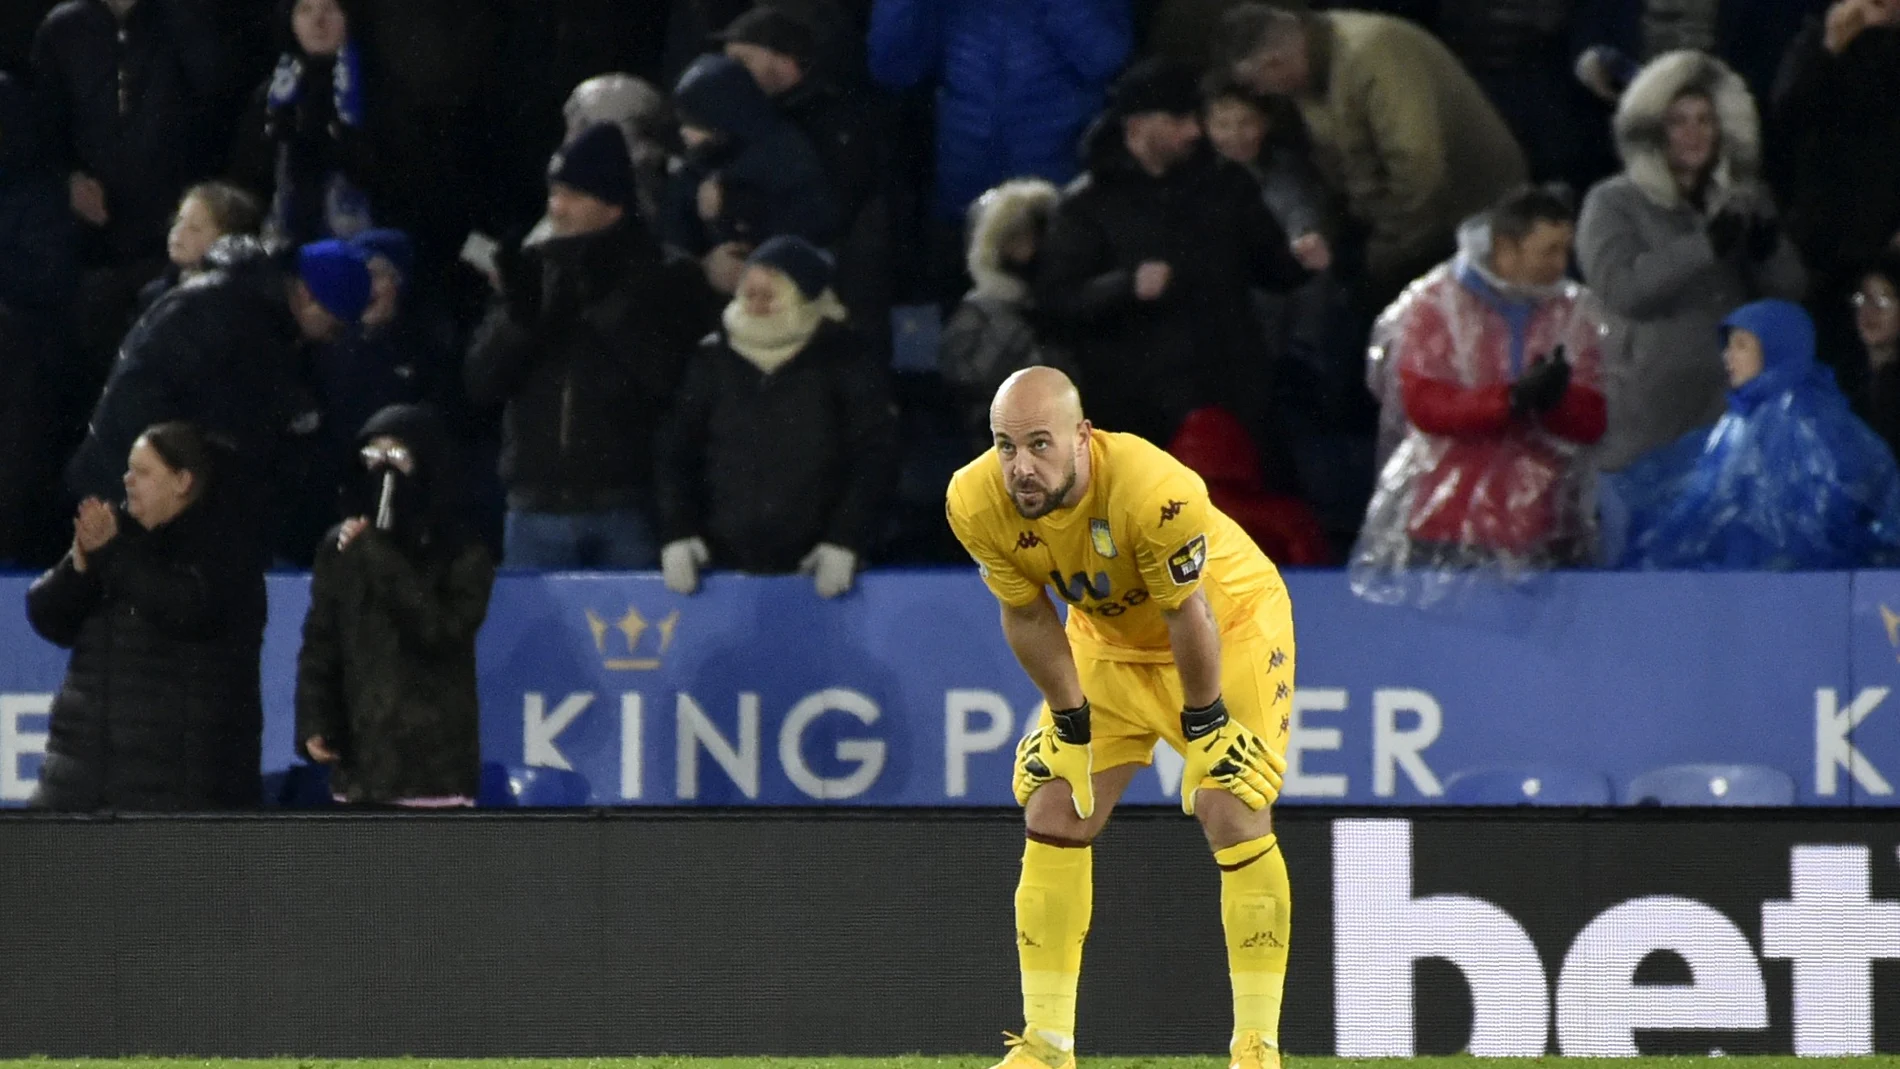 Aston Villa's goalkeeper Pepe Reina reacts after Leicester's Harvey Barnes scored the opening goal during the English Premier League soccer match between Leicester City and Aston Villa at the King Power Stadium, in Leicester, England, Monday, March 9, 2020. (AP Photo/Rui Vieira)